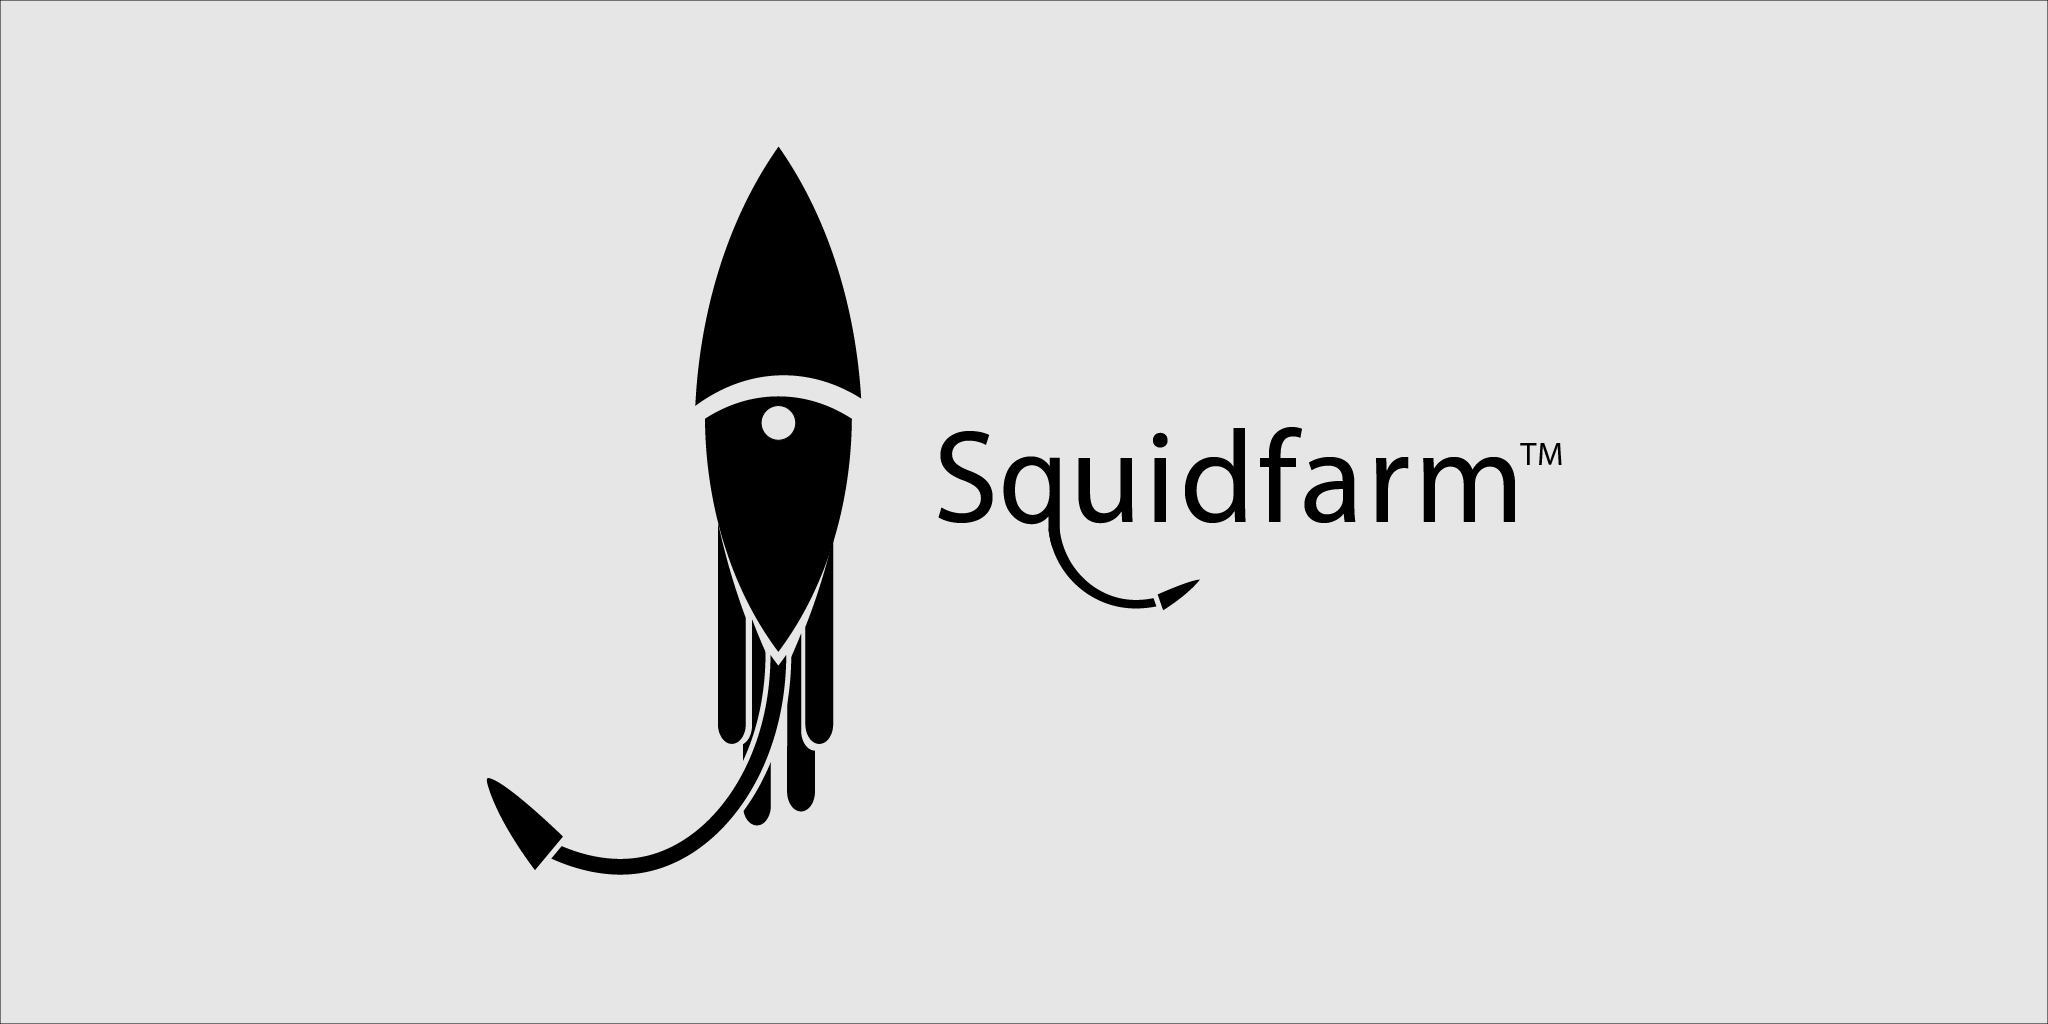 Squid Sports Logo - Made This Squid Logo Just For Fun, Any Thoughts? : logodesign